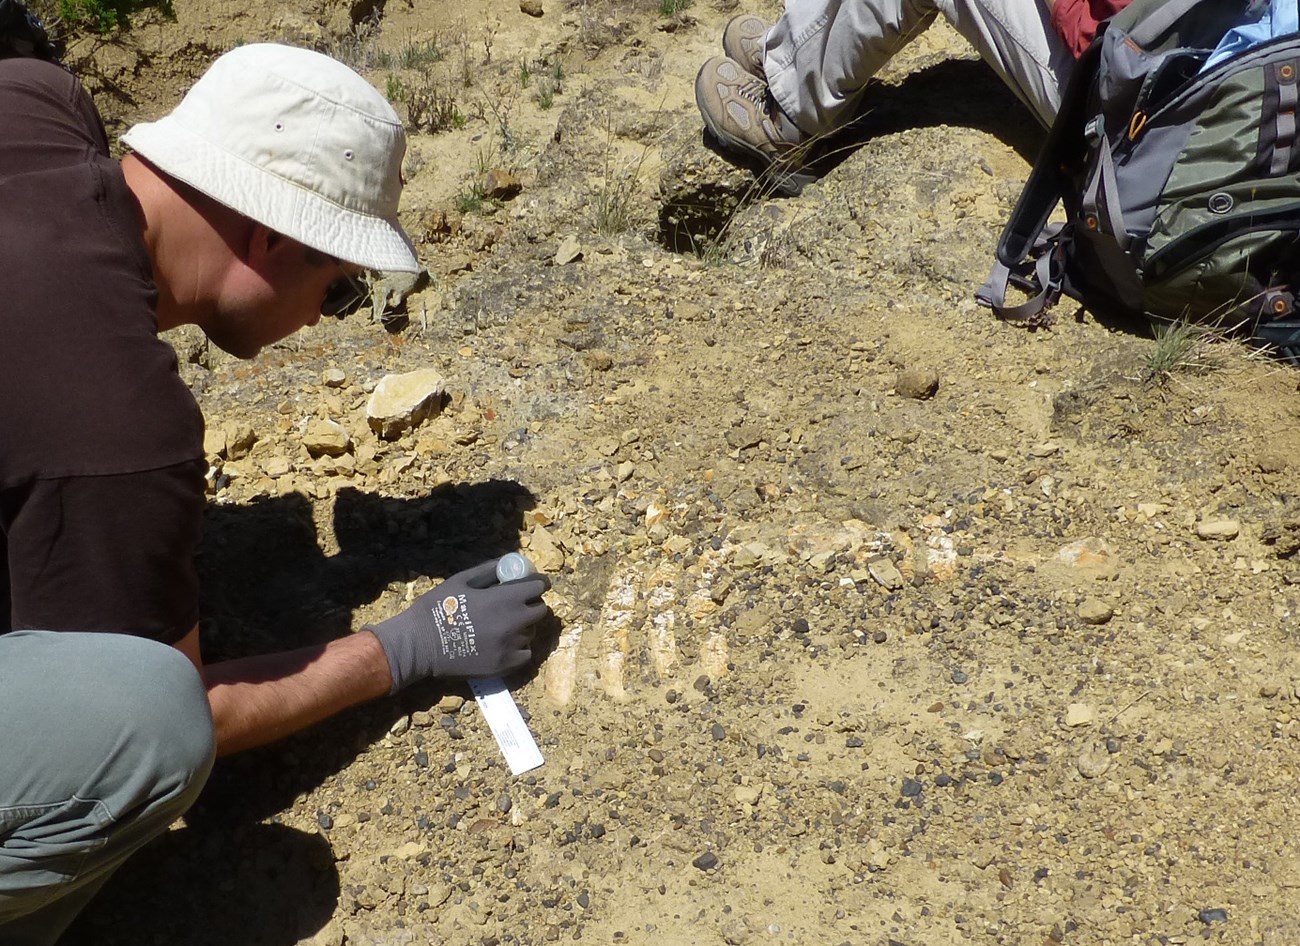 Scientist wearing gloves and squeezing a liquid stabilizer out of a small plastic bottle onto a fossil in dirt.